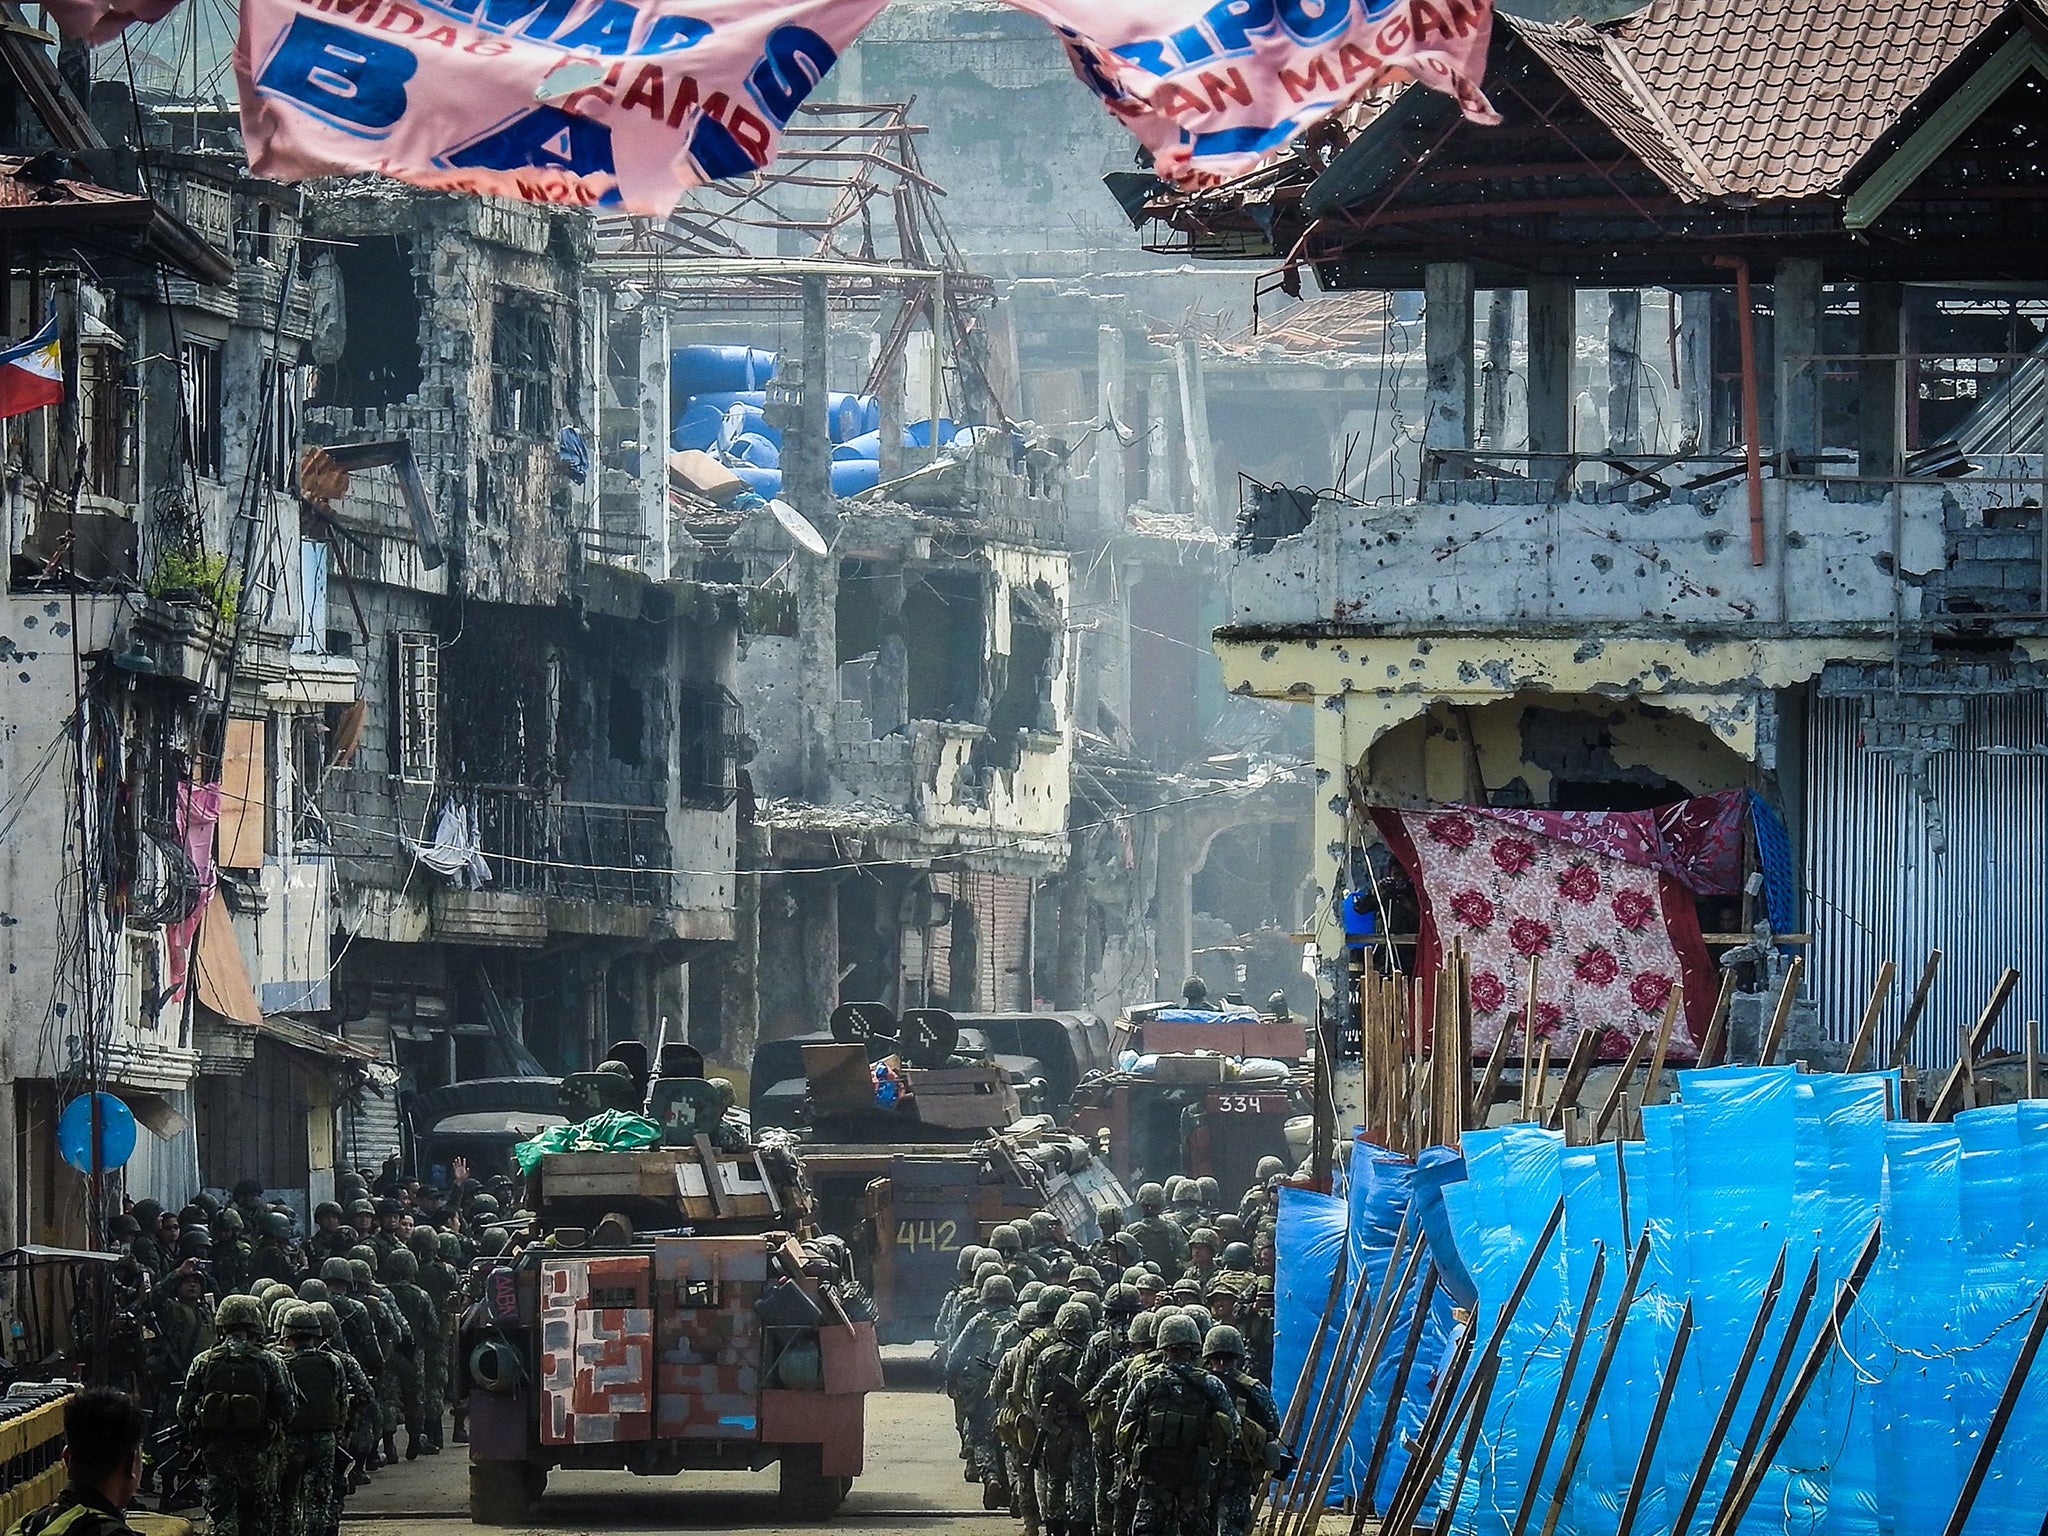 Filipino troops marching through Marawi City last week. The army is struggling to push out the last remaining insurgents from the city